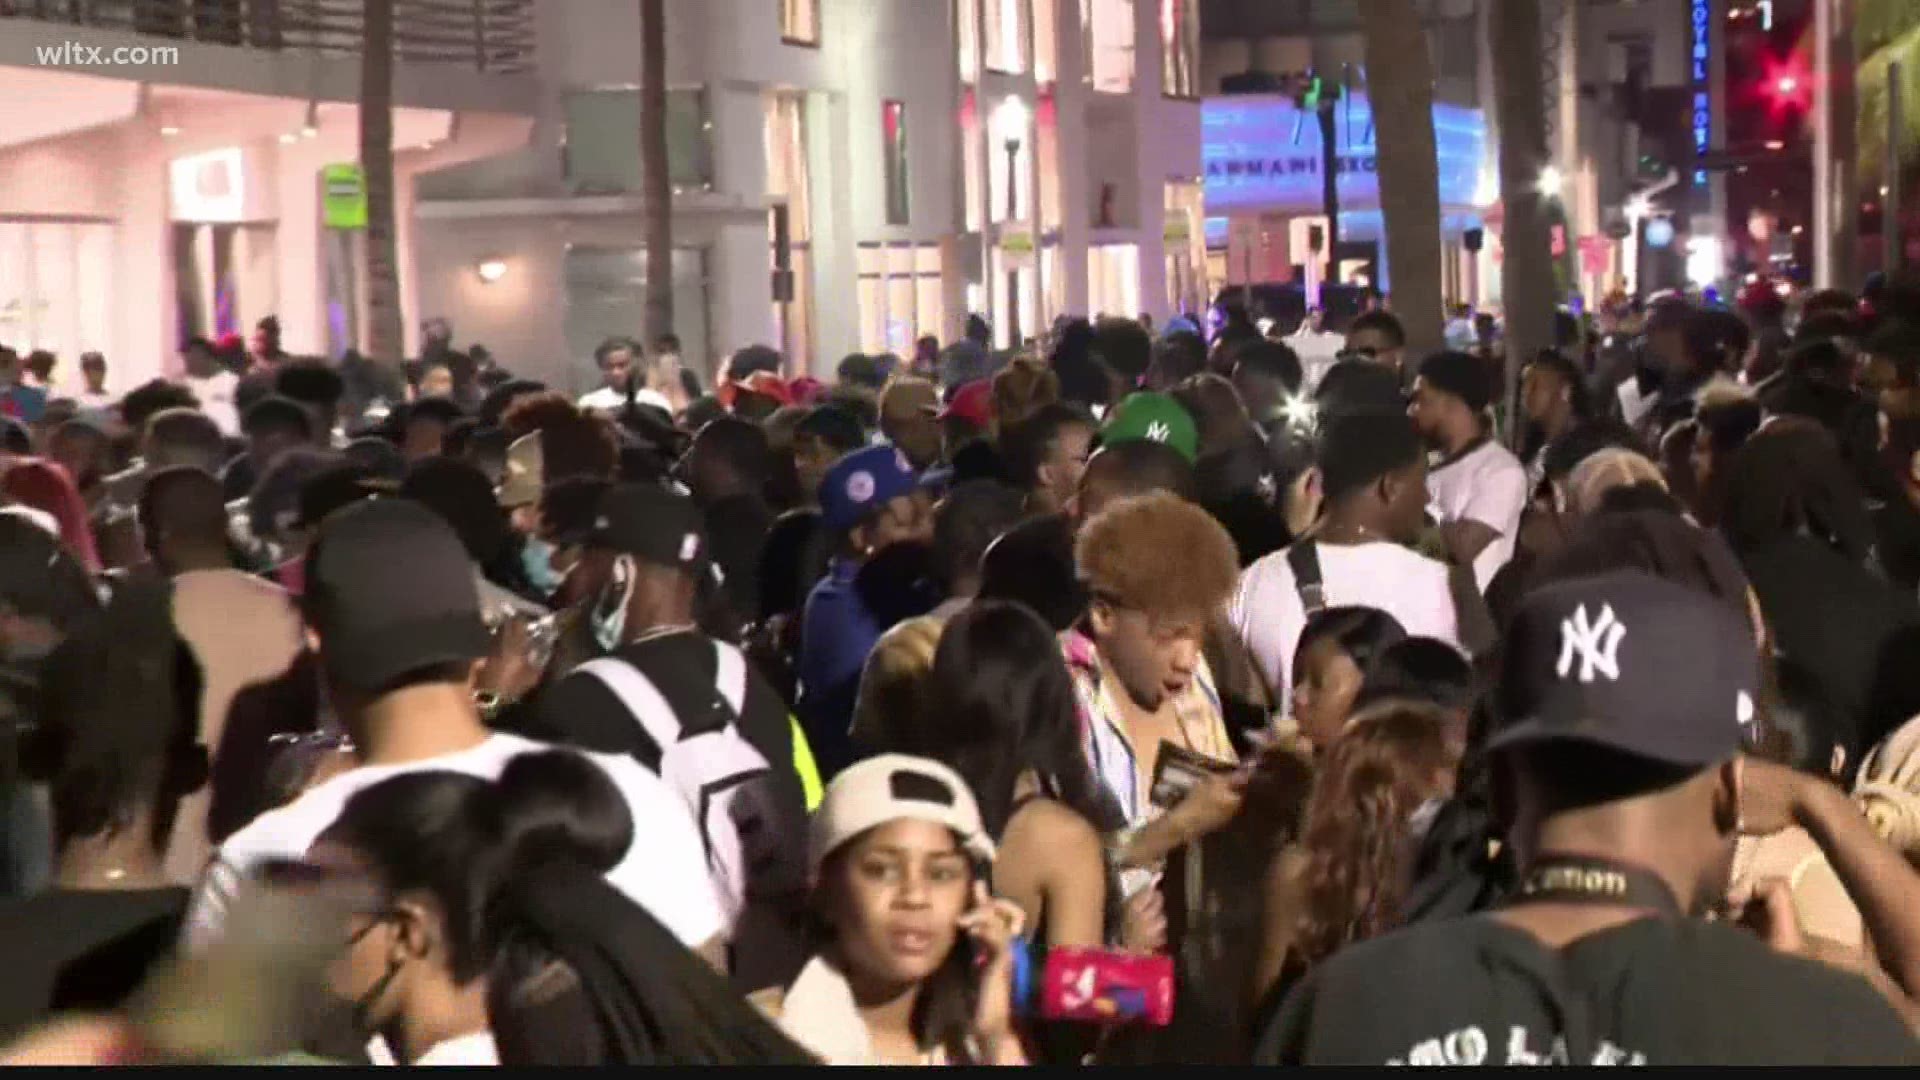 Chaotic scenes showing maskless spring breakers drinking and partying in the streets of Miami and no social distancing has health experts up at night.